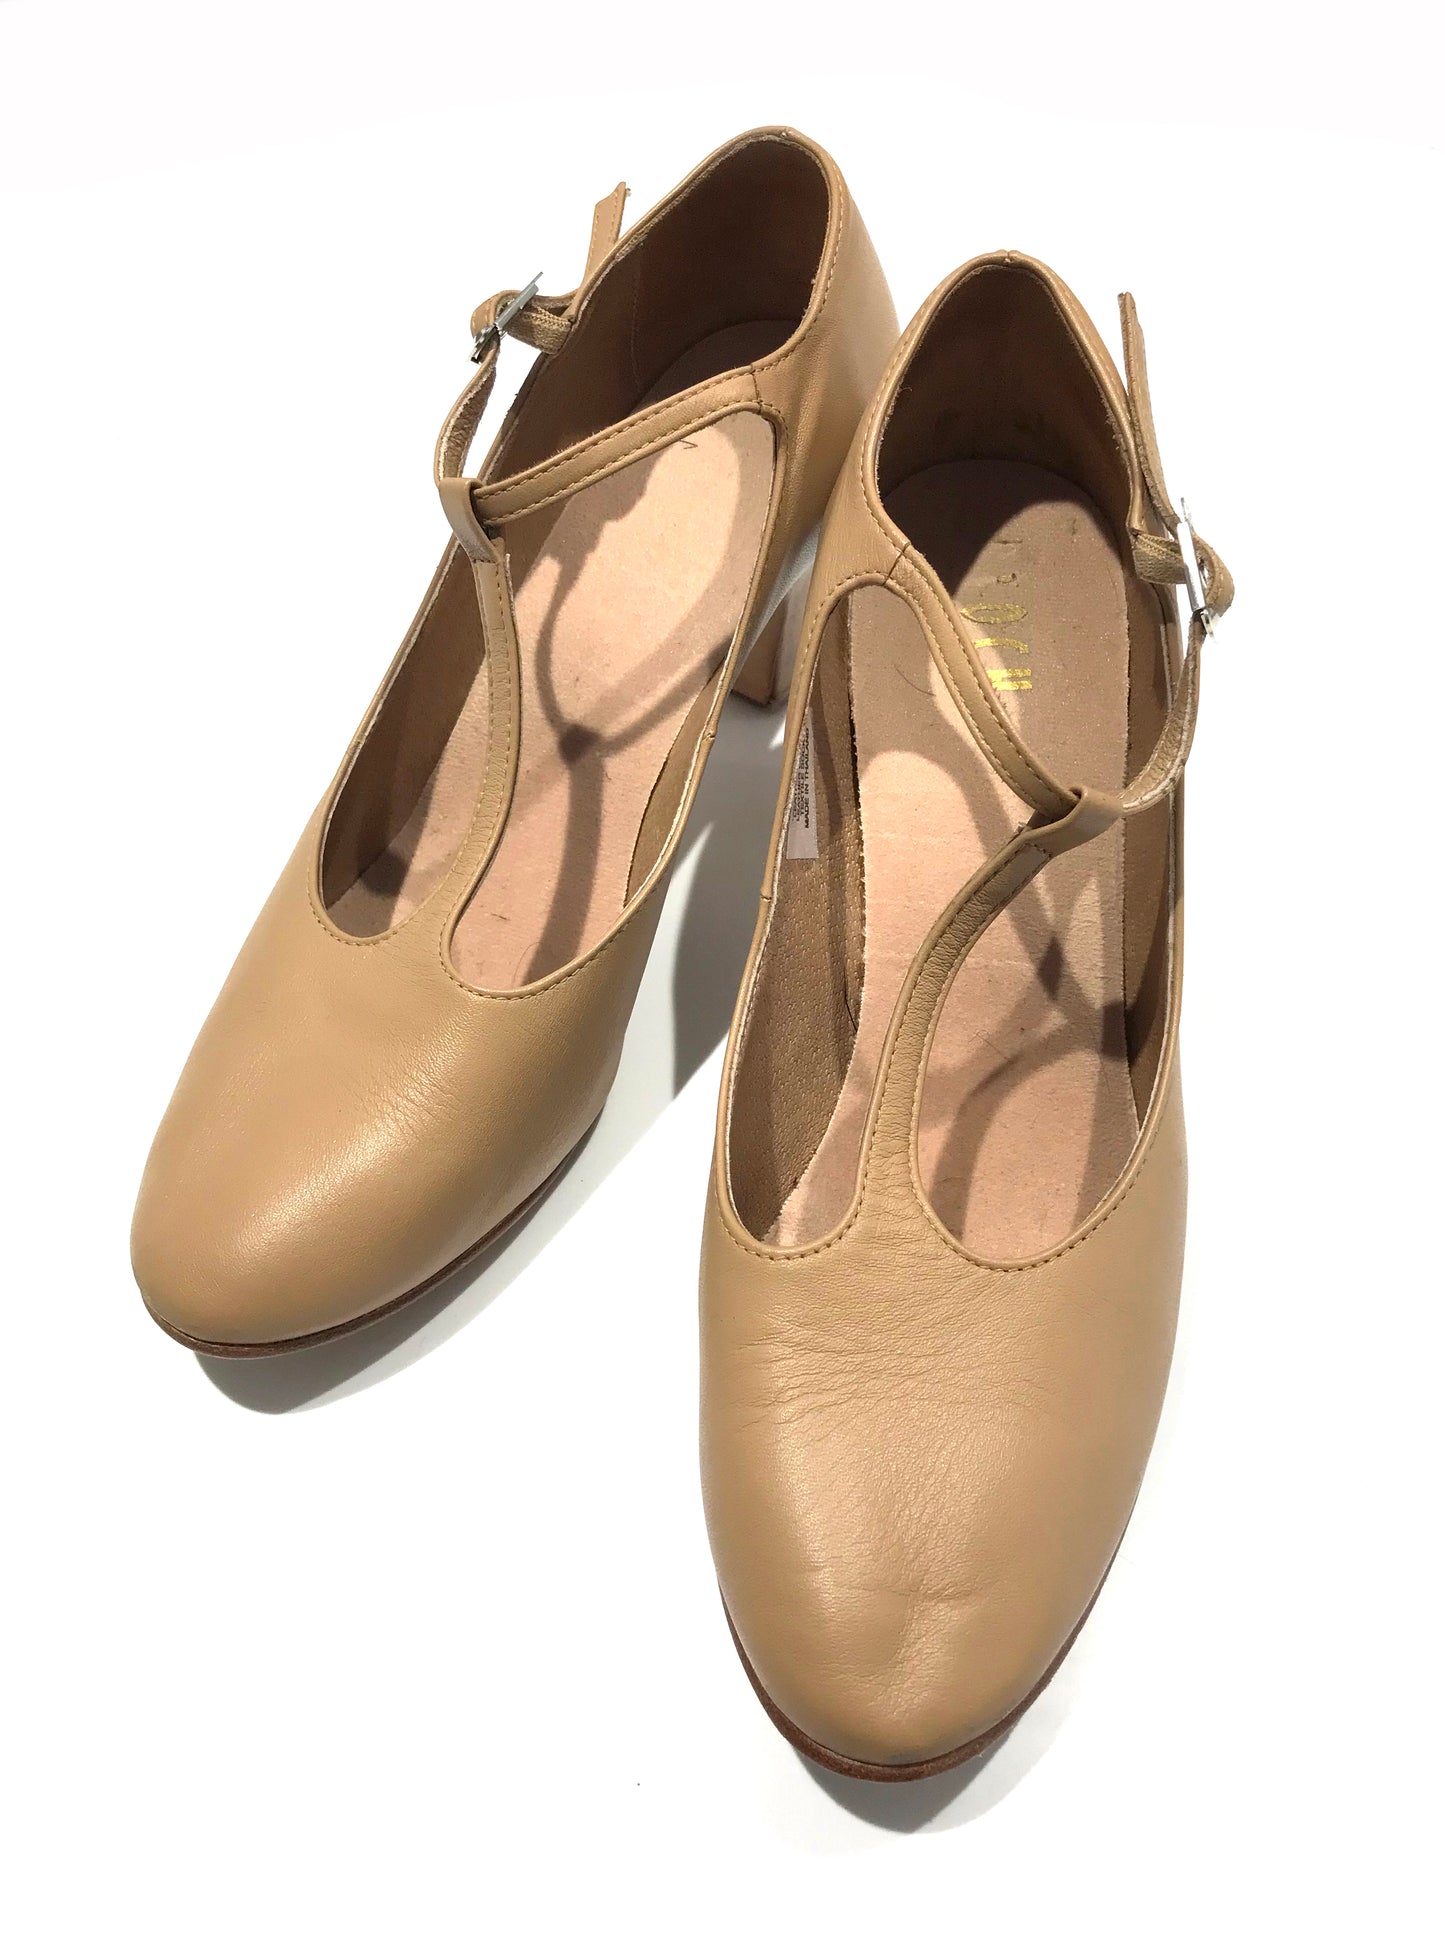 Bloch Roxie Character Dance Shoes